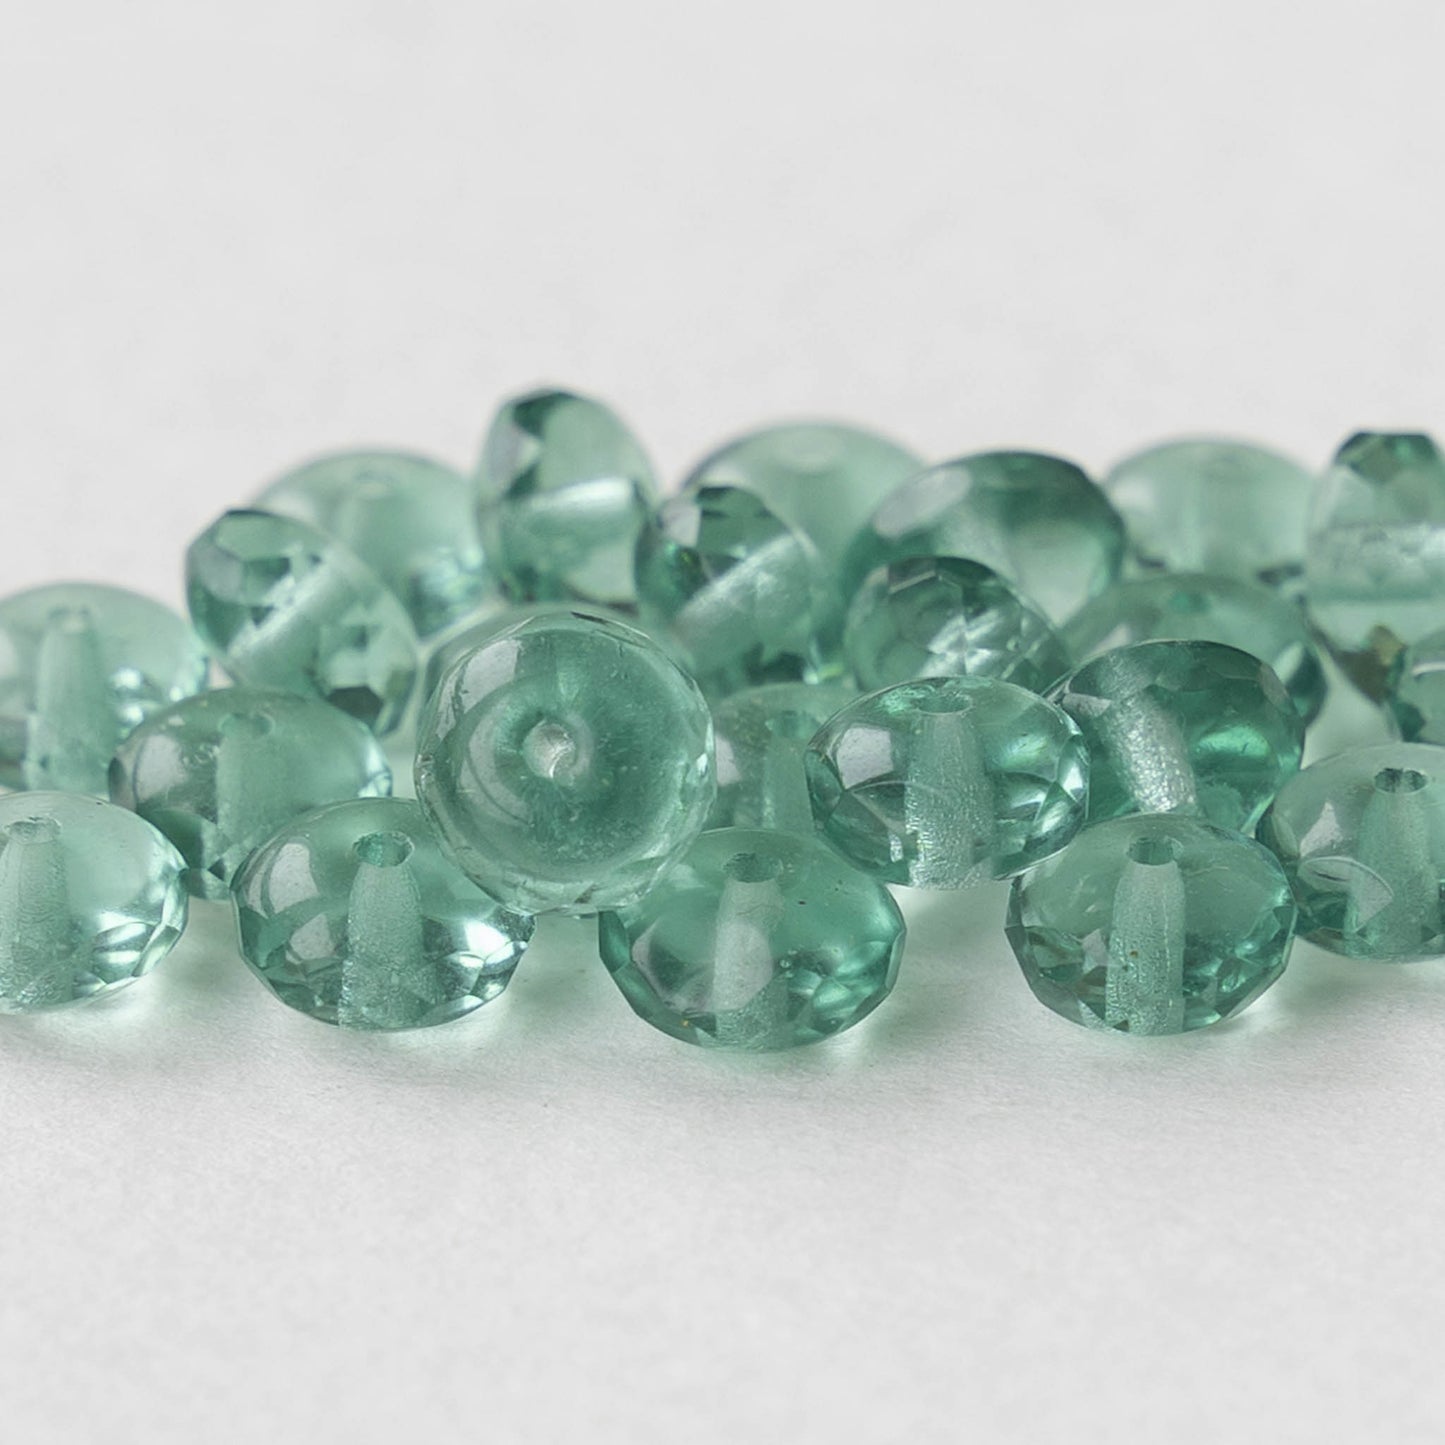 Load image into Gallery viewer, 5x7mm Rondelle Beads - Transparent Green Tourmaline - 25 Beads
